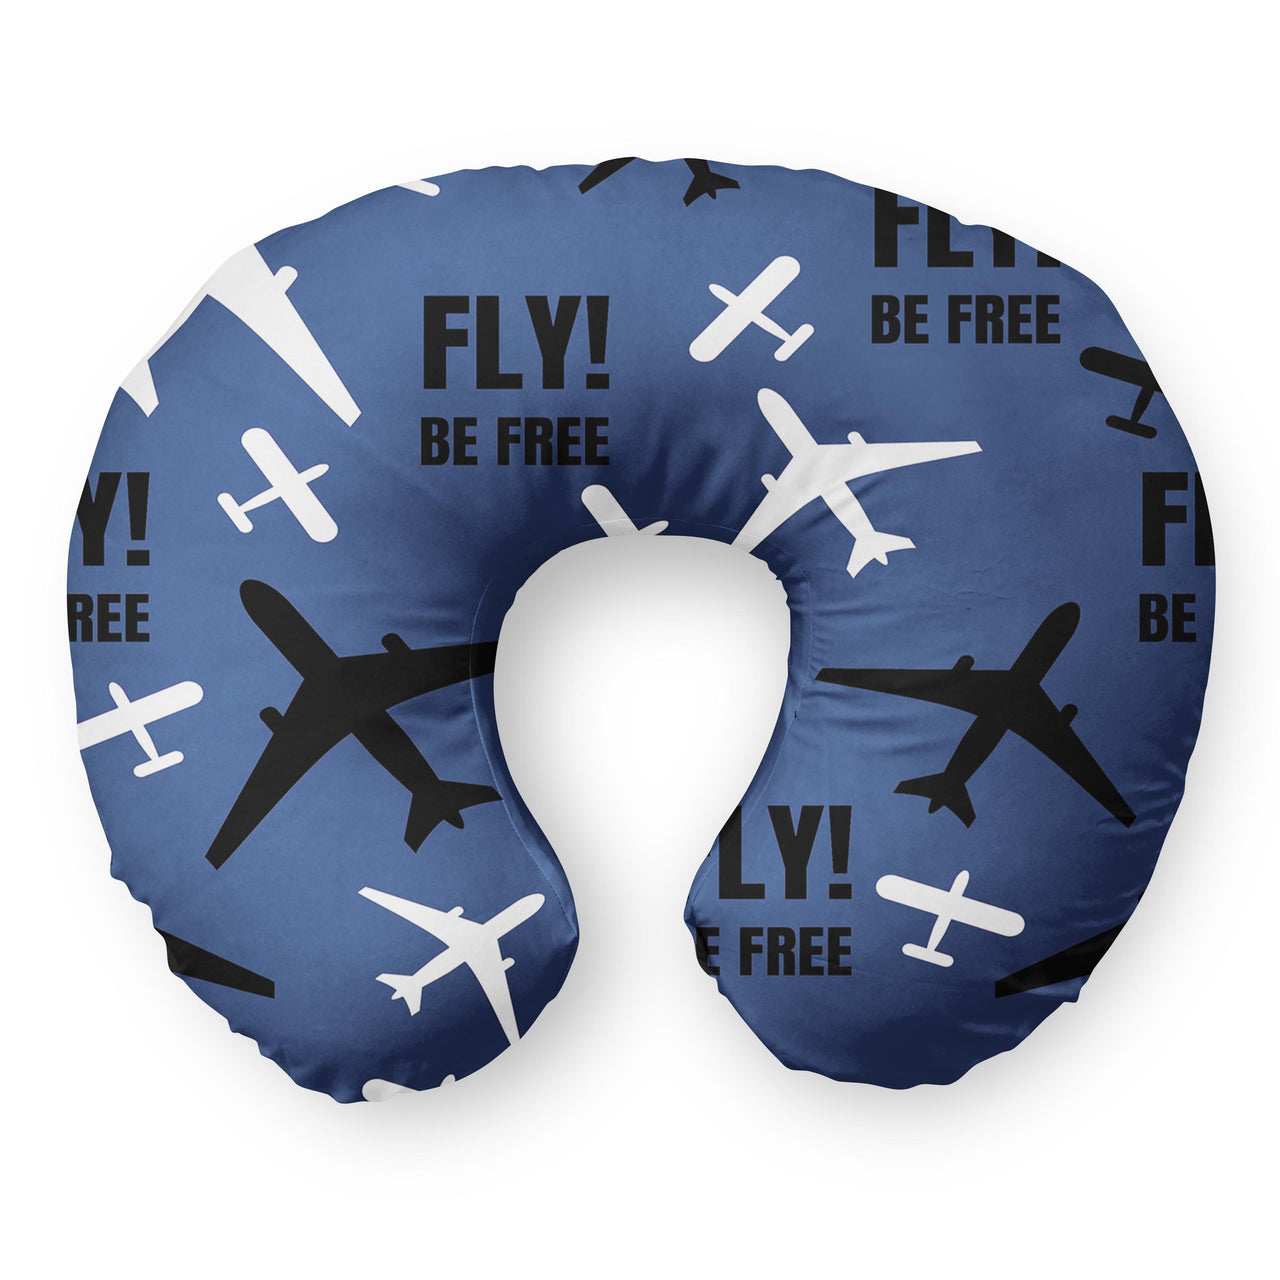 Fly Be Free (Blue) Travel & Boppy Pillows